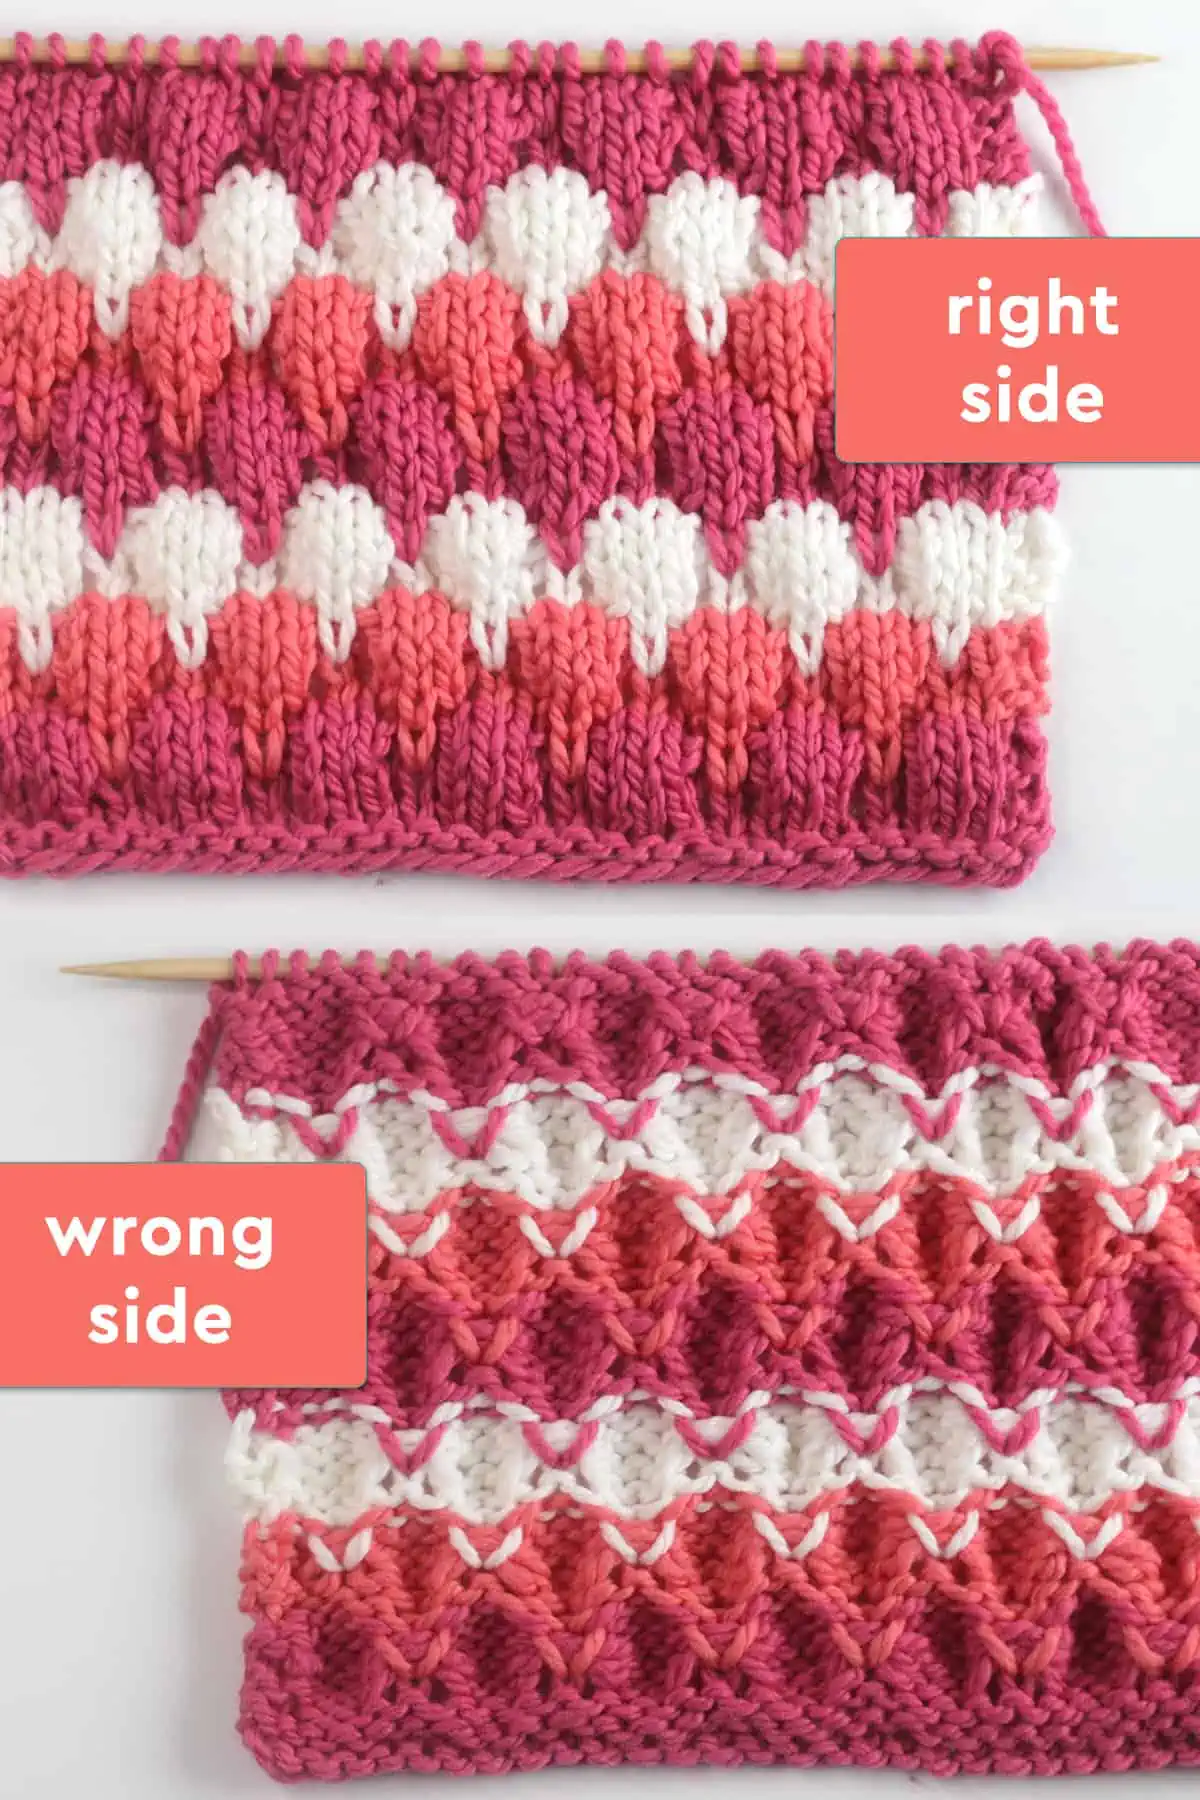 Right and wrong sides of the Bubble Stitch in pink, orange, and white colored yarn on knitting needle.